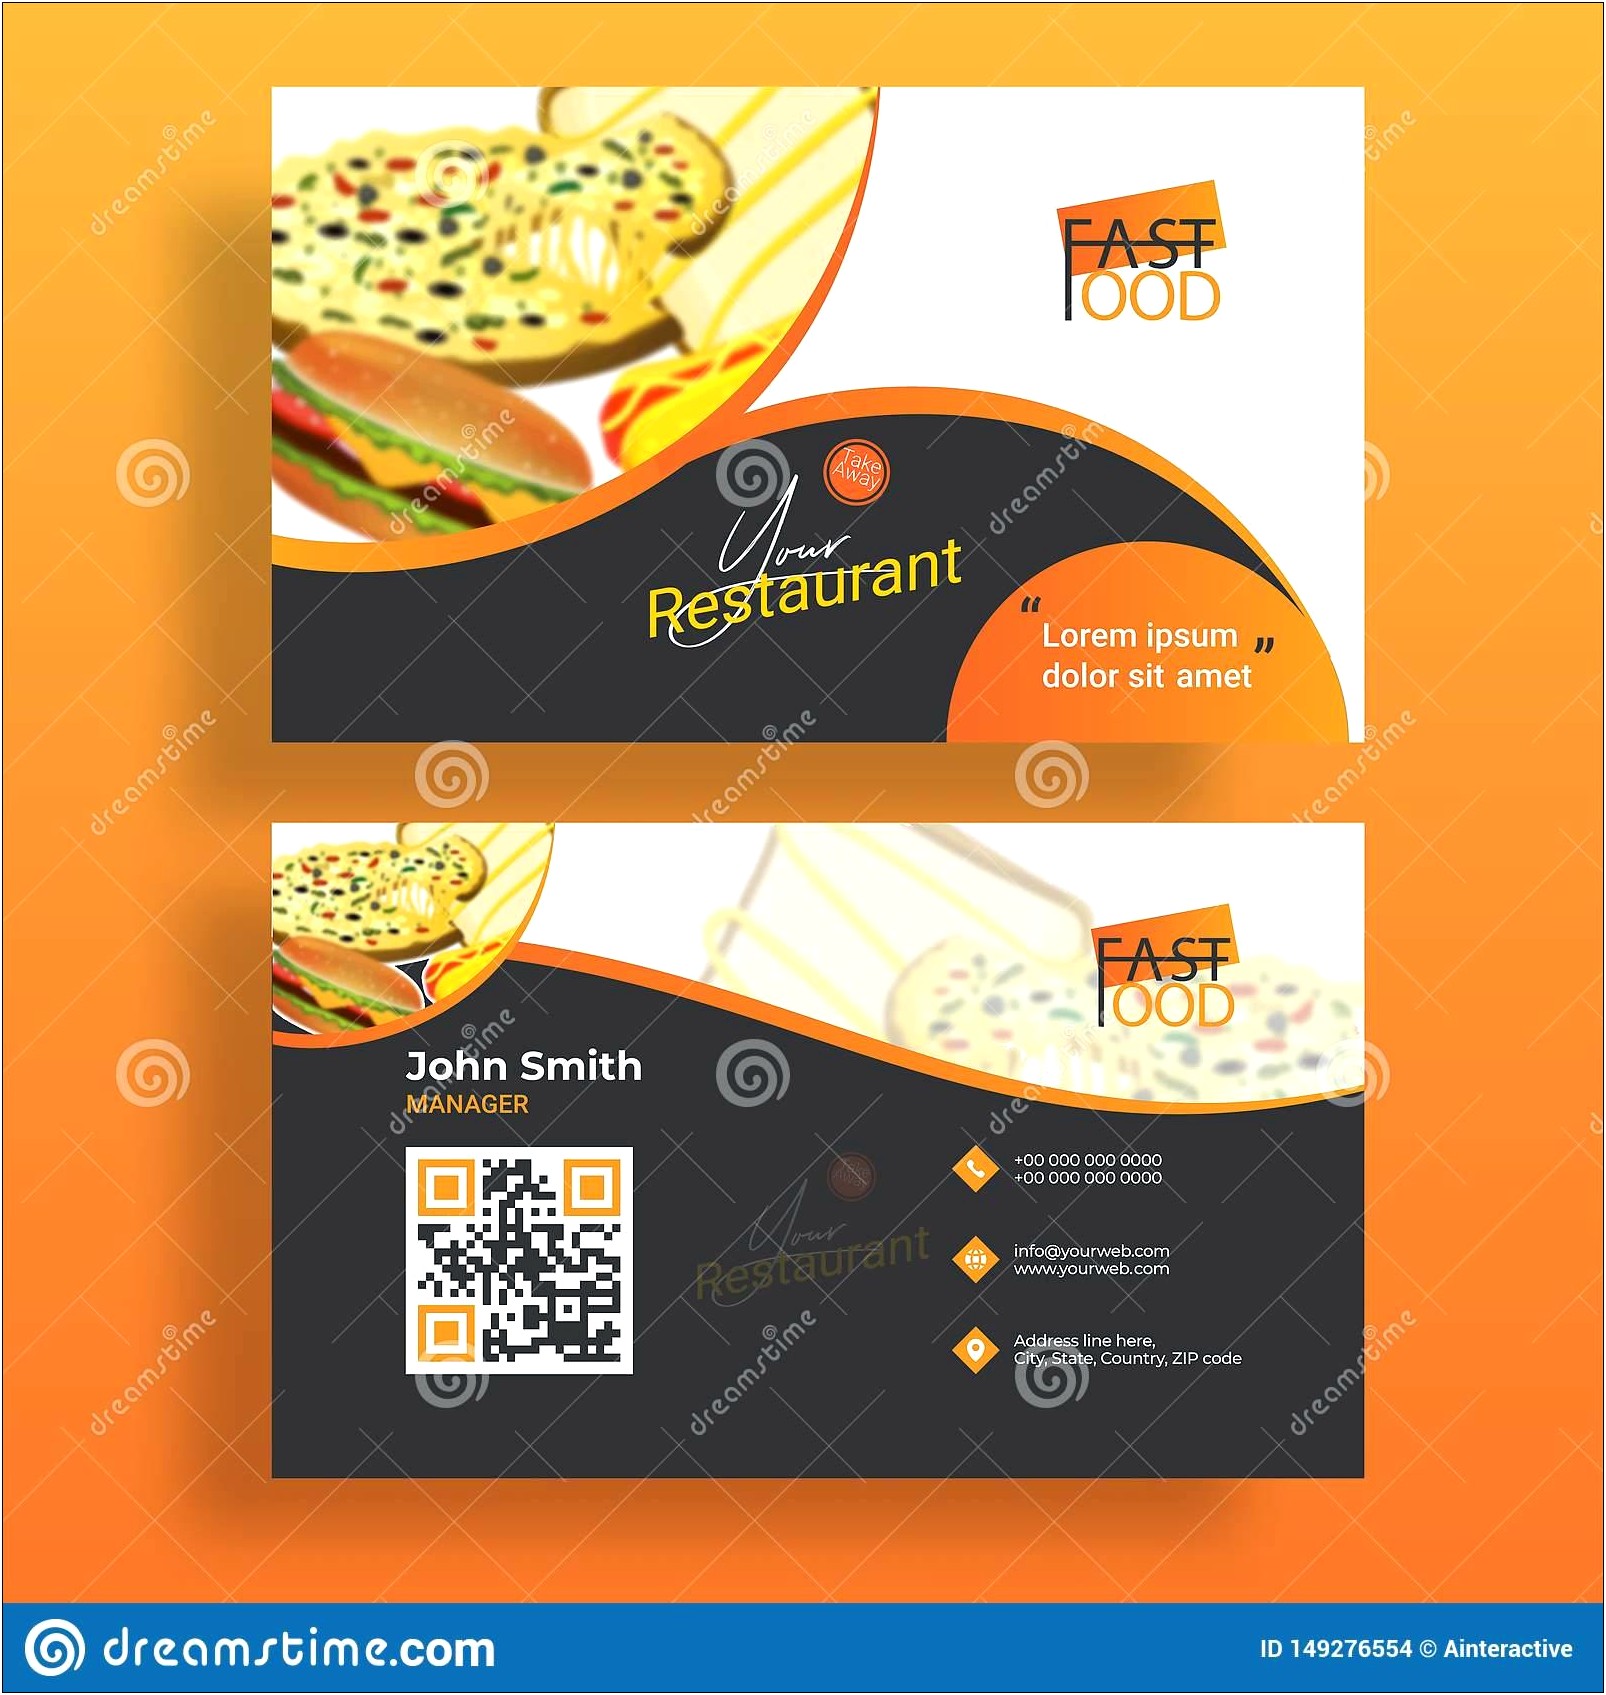 Food Business Card Template Free Download